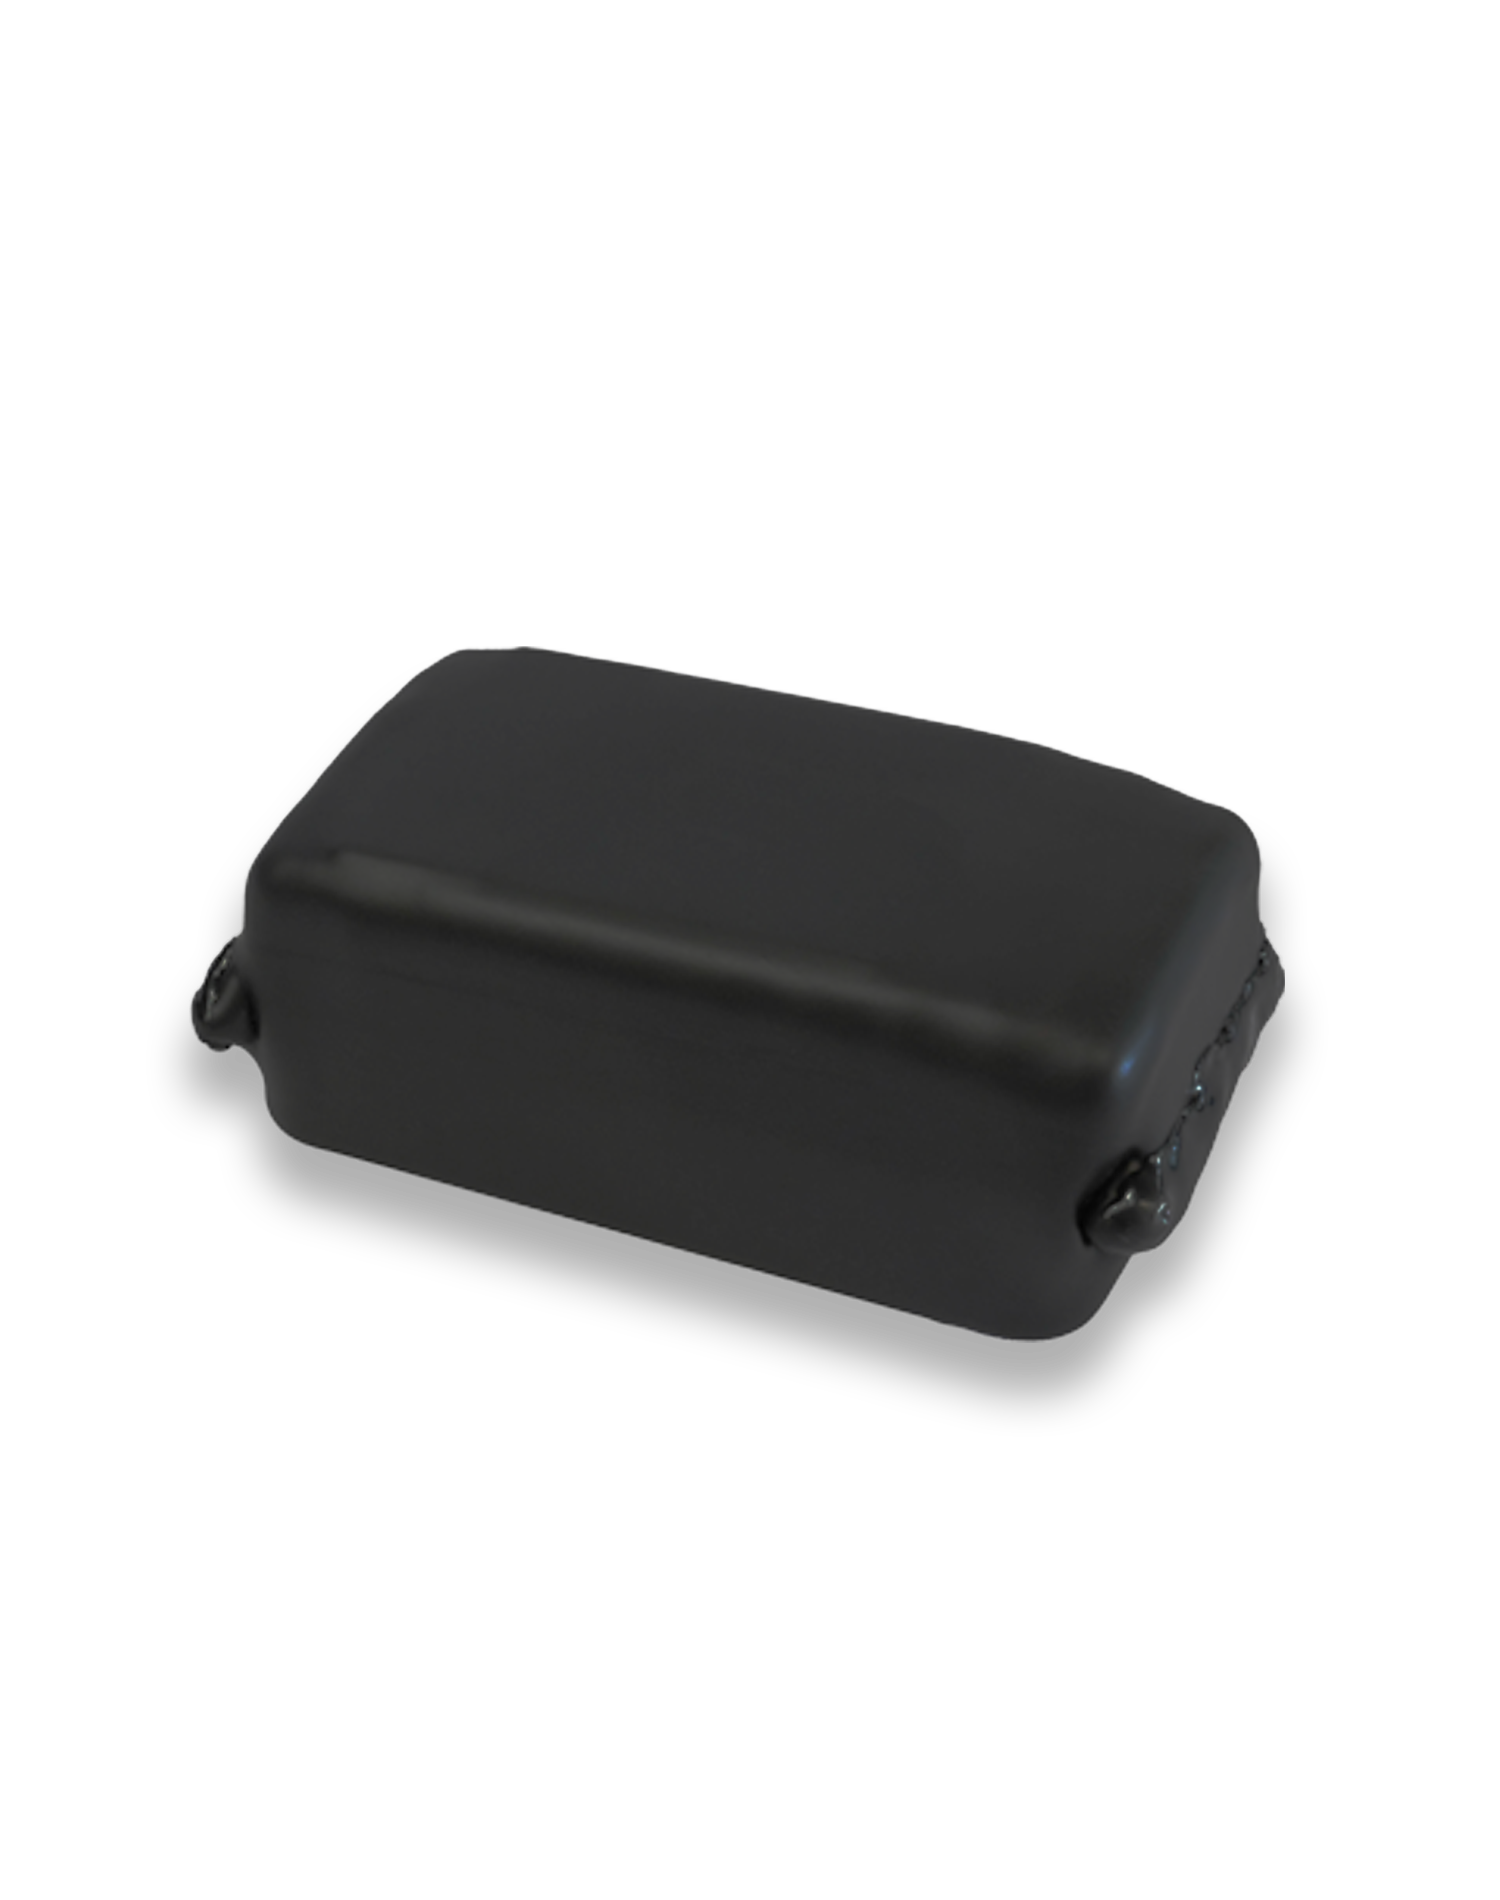 GPS Tracker Global 3000 with no background